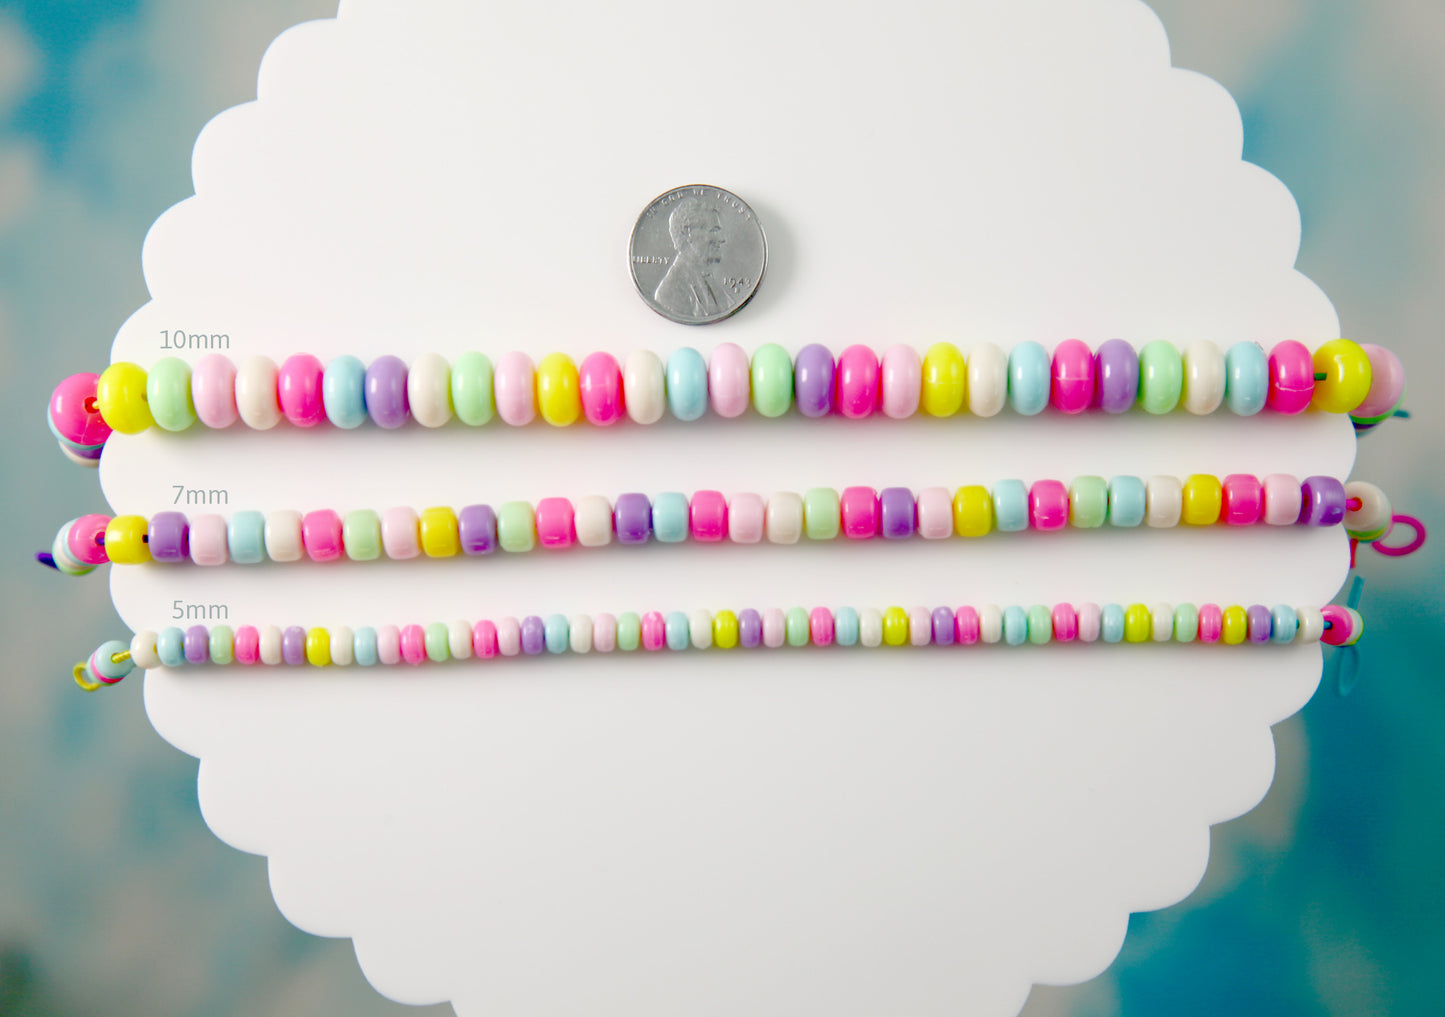 Candy Necklace Beads - 7mm Chunky Candy Color Rondelle Pastel Disc Shaped Faux Candies Acrylic or Plastic Beads - 160 pc set